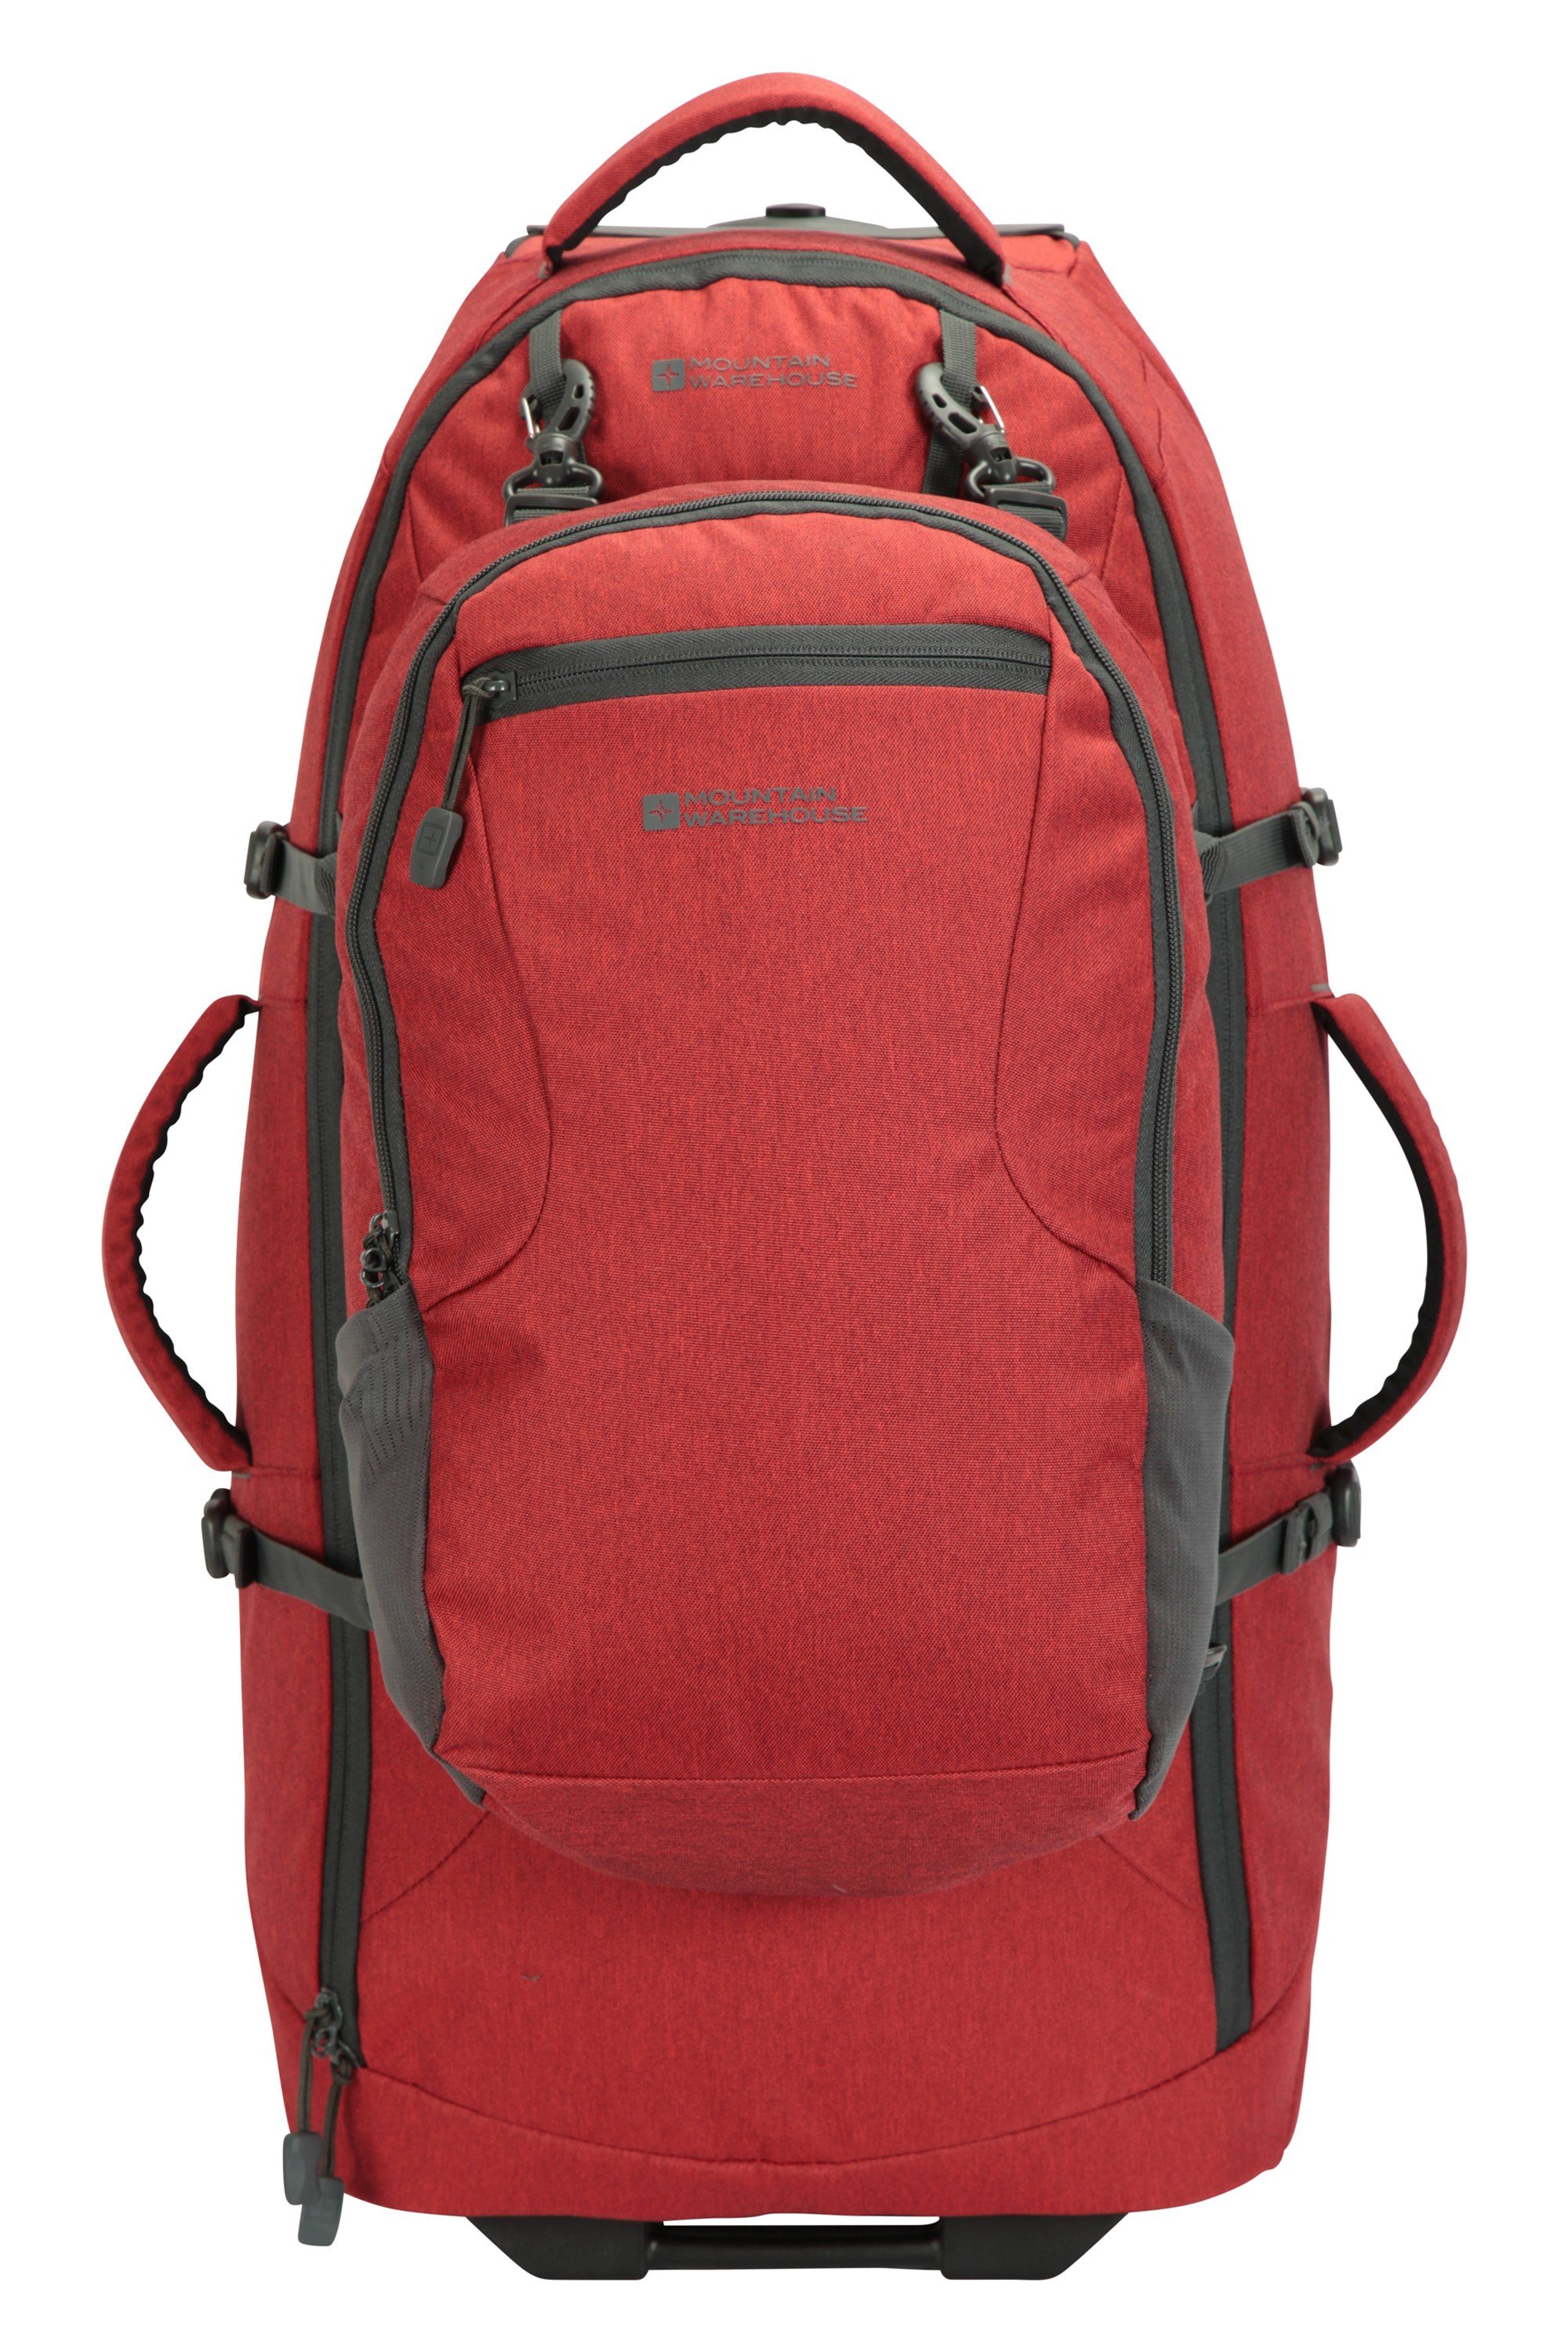 Mountain Warehouse Voyager Wheelie 50 20 Litre Backpack Red